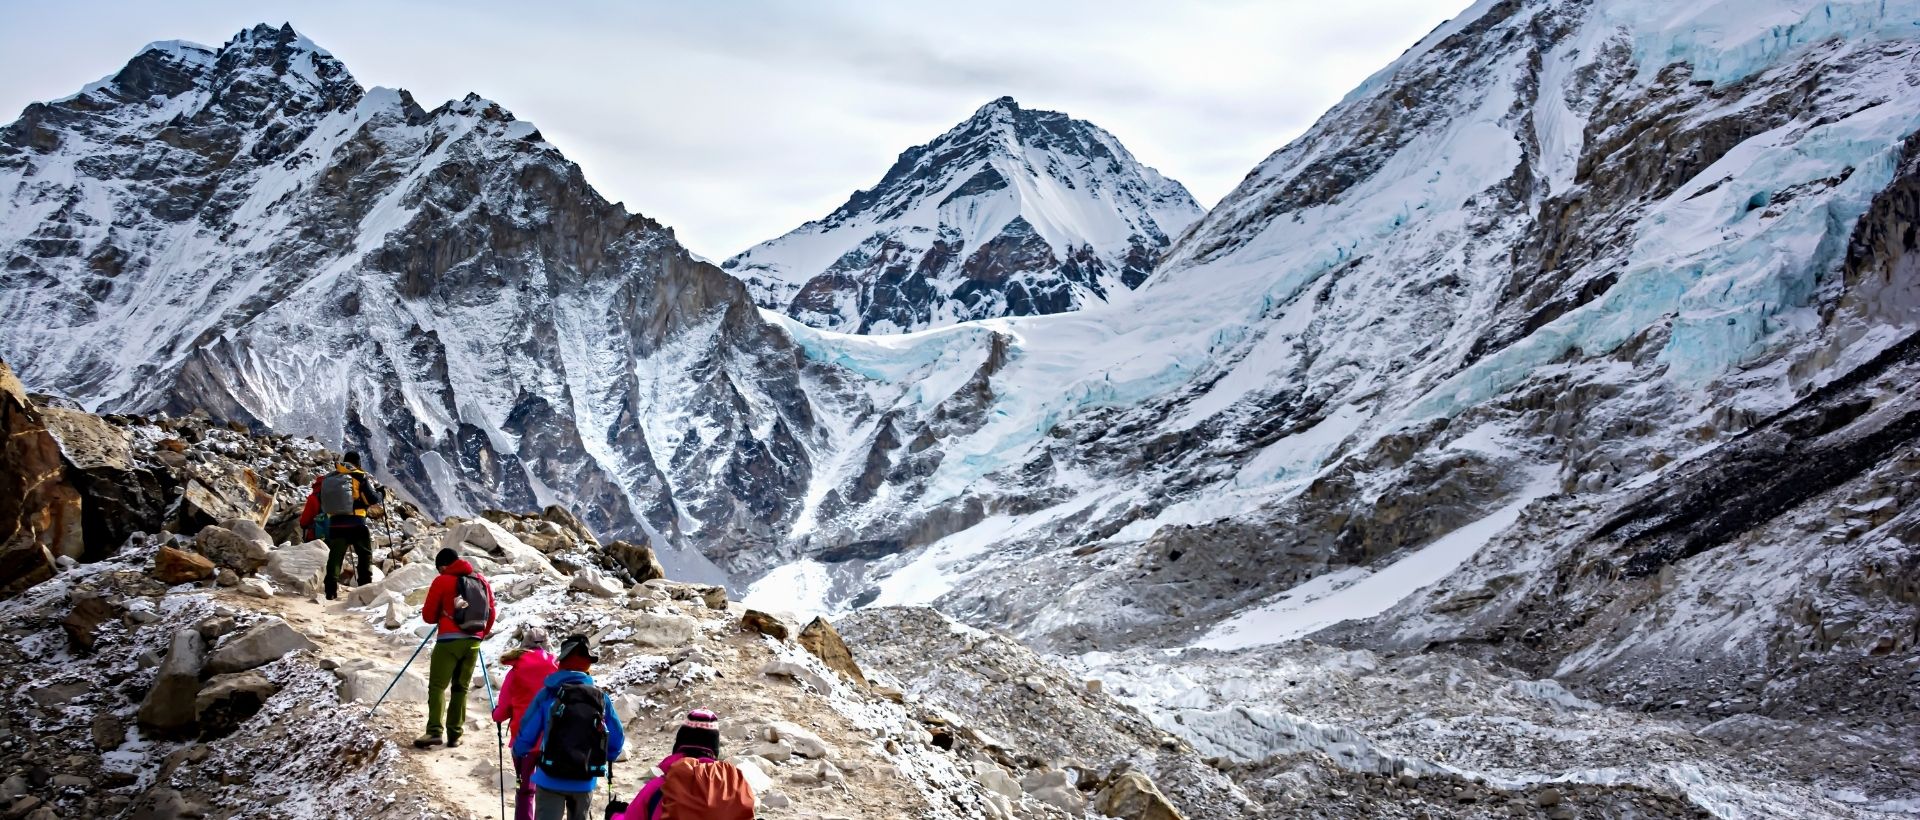 Hikers climbing up mt everest